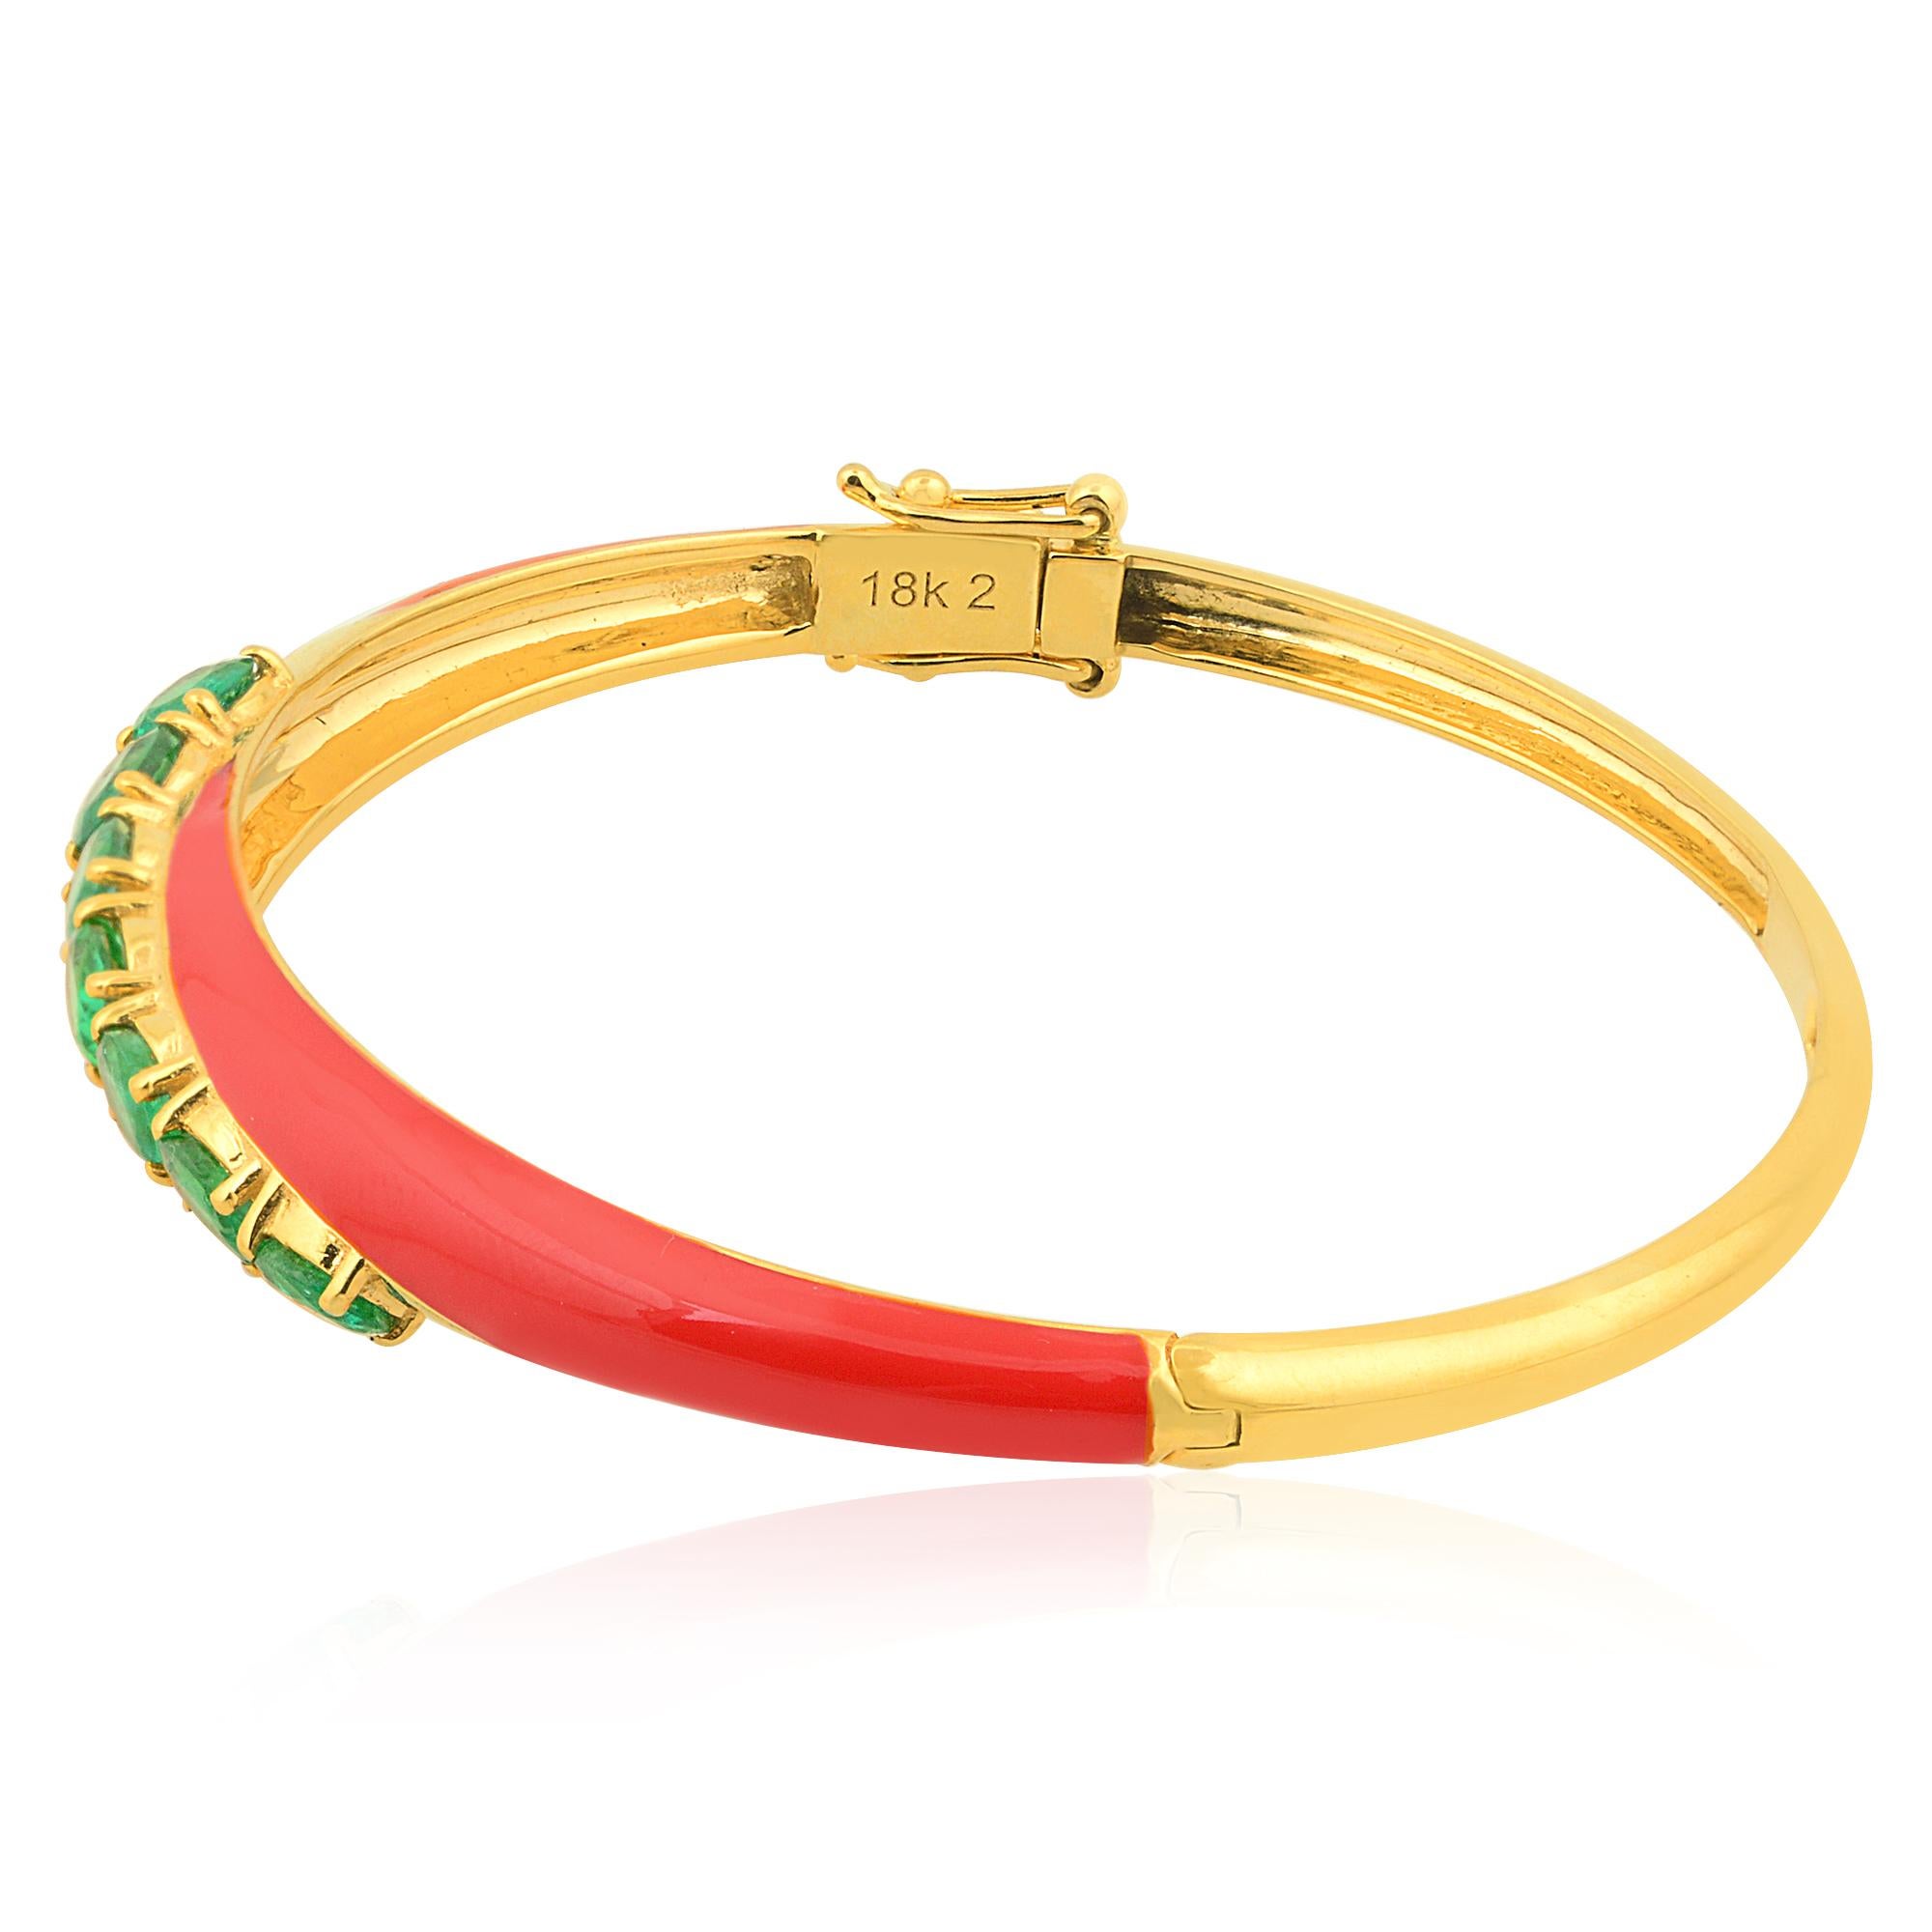 Item Code :- SEB-6177
Gross Weight :- 12.21 gm
18k Yellow Gold Weight :- 11.76 gm
Emerald Weight :- 2.27 carat 
Bangle Size :- 60x40 mm outer diameter
✦ Sizing
.....................
We can adjust most items to fit your sizing preferences. Most items